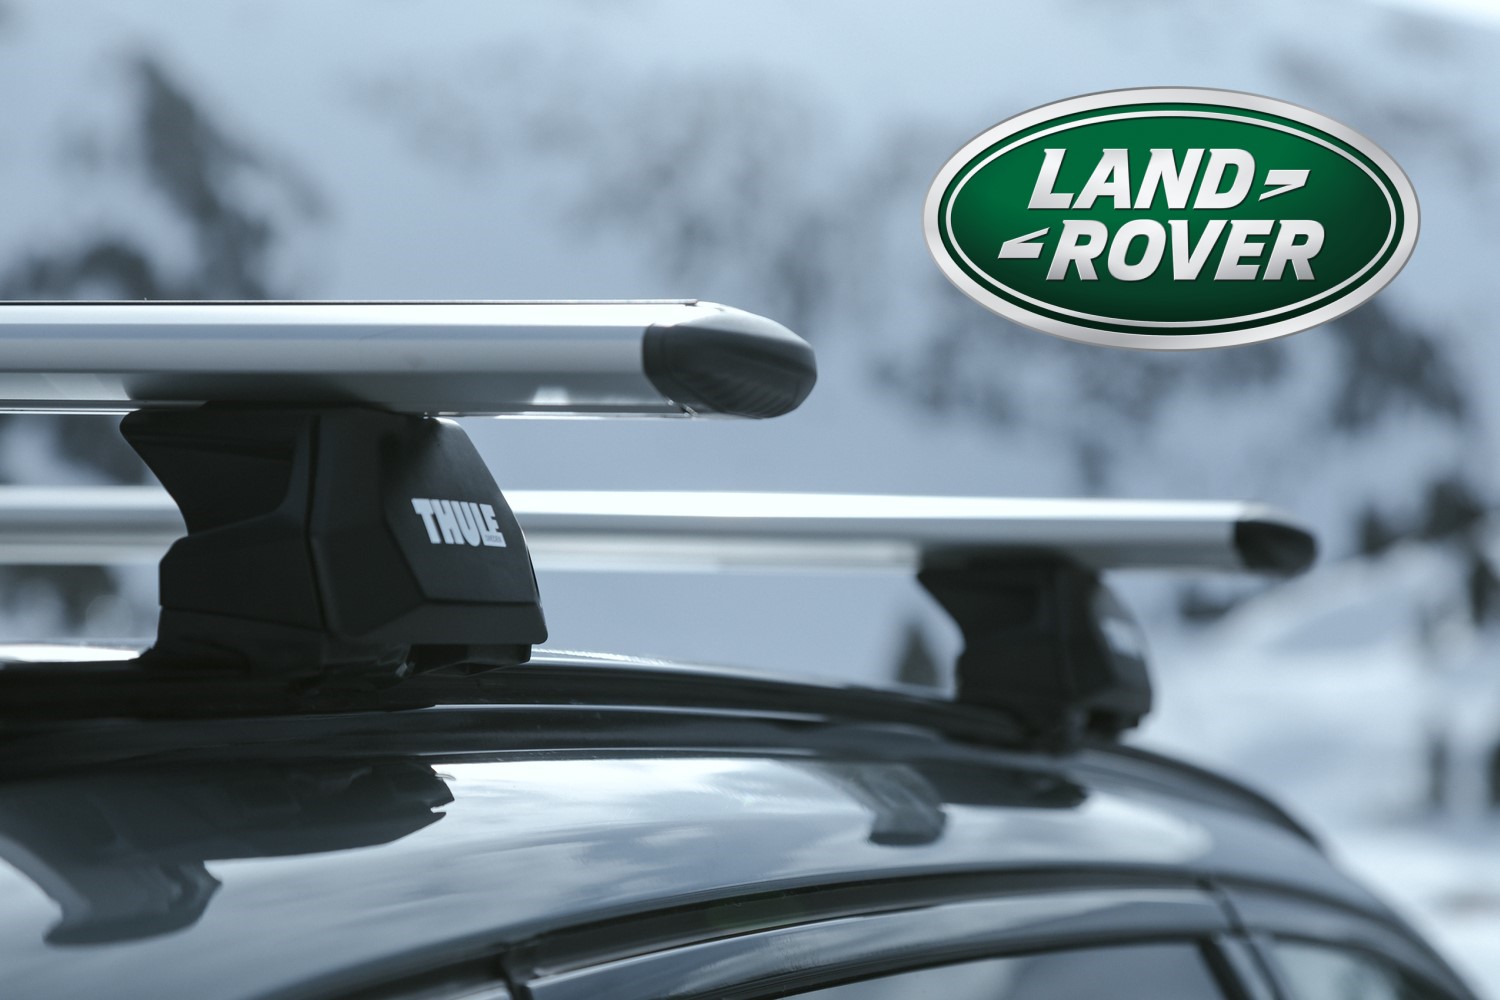 Landrover roof bars by Thule